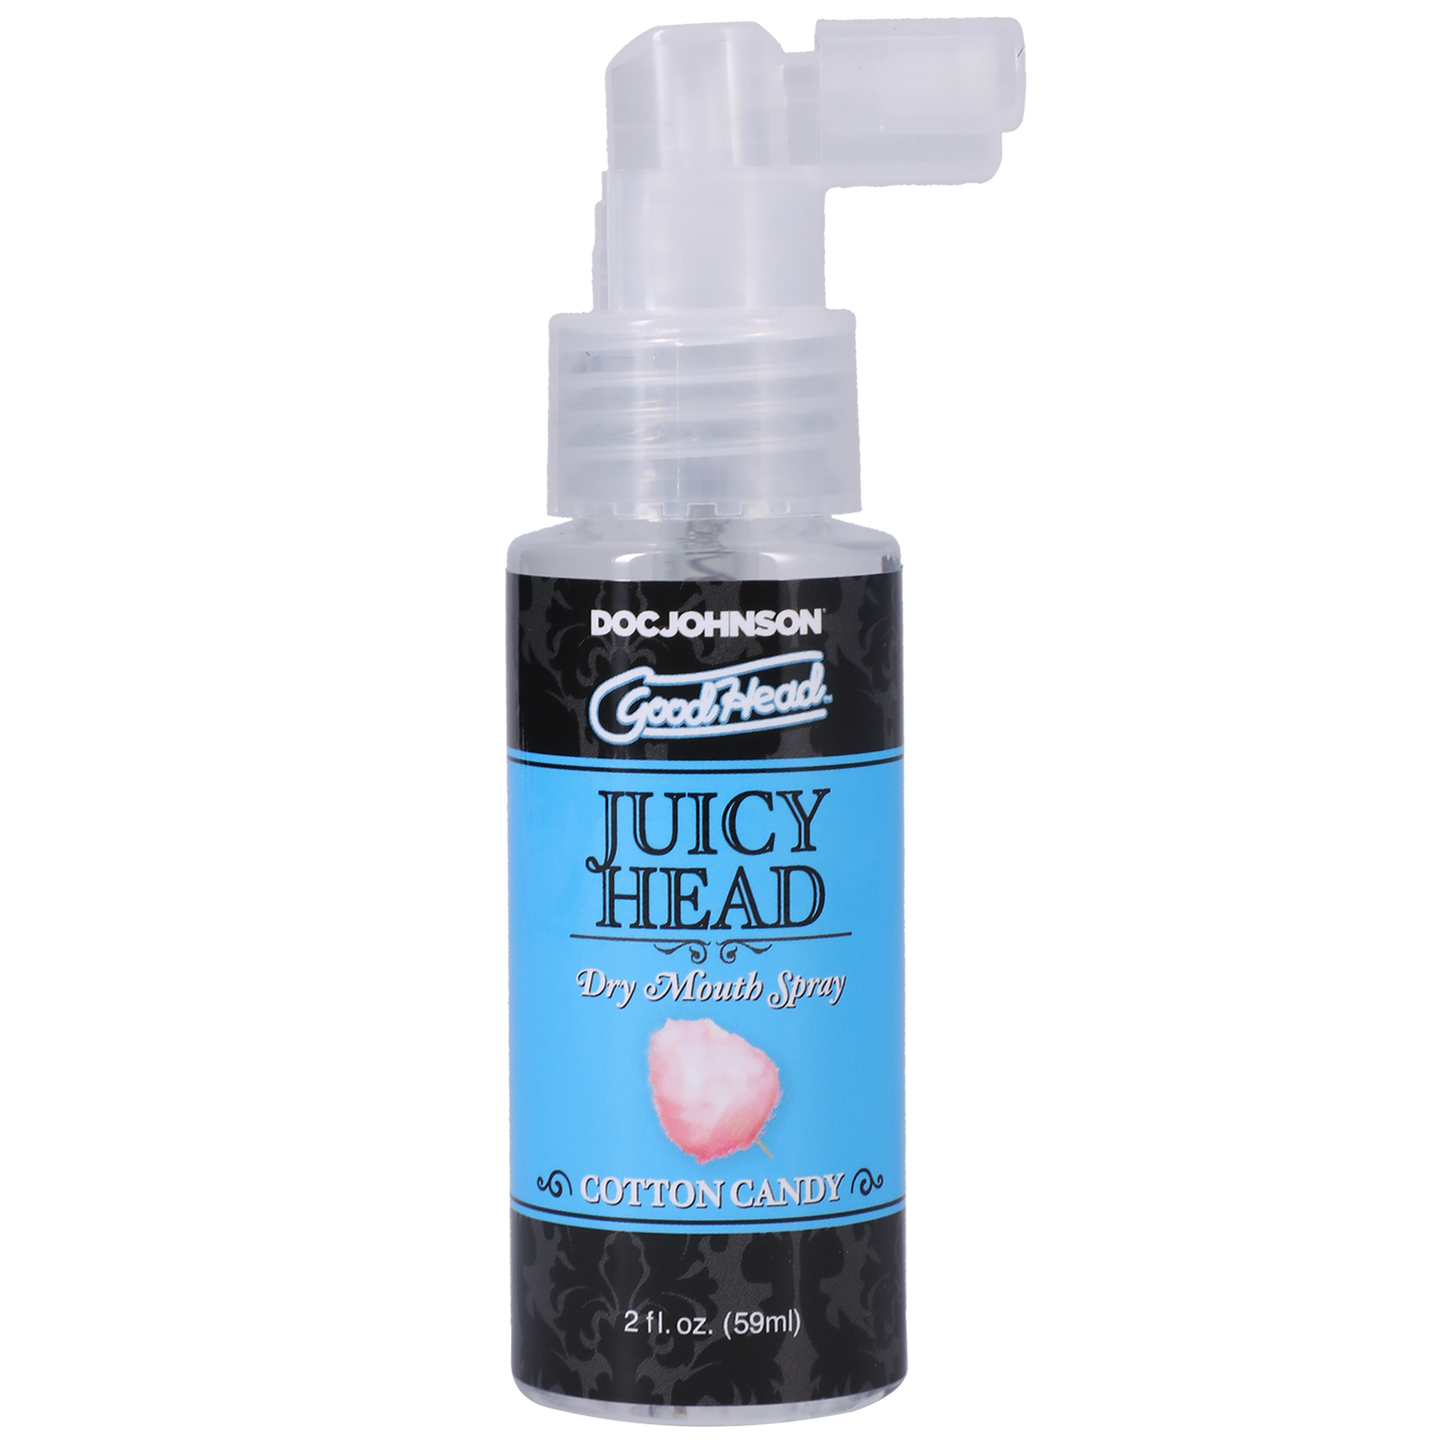 Photo of the bottle of GoodHead Juicy Head from Doc Johson (cotton candy) shows its easy to use pump spray nozzle.